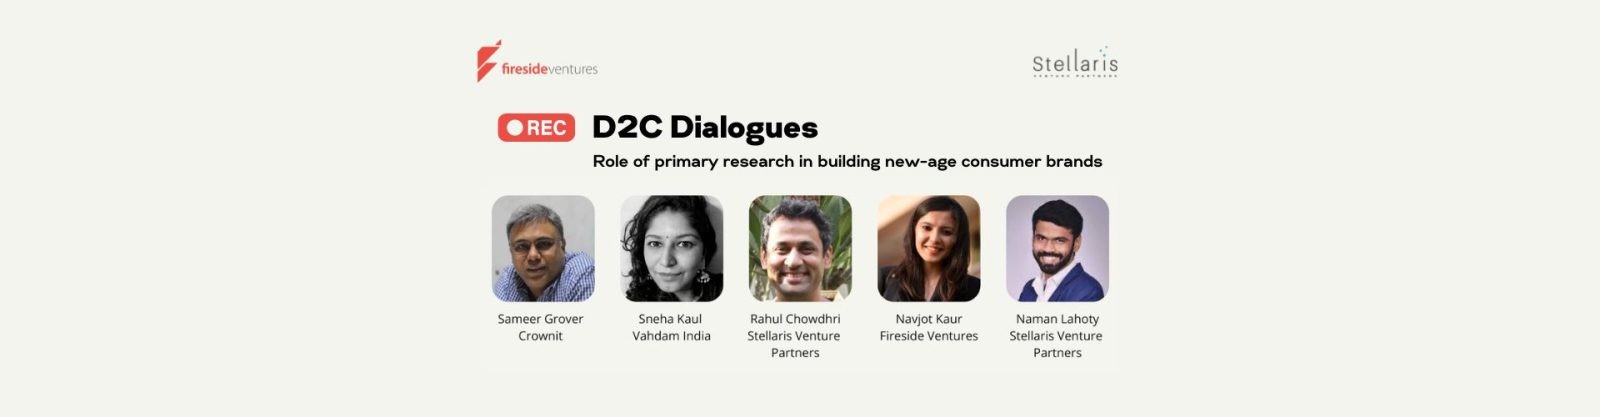 D2C Dialogues #5: Role of primary research in building consumer brands